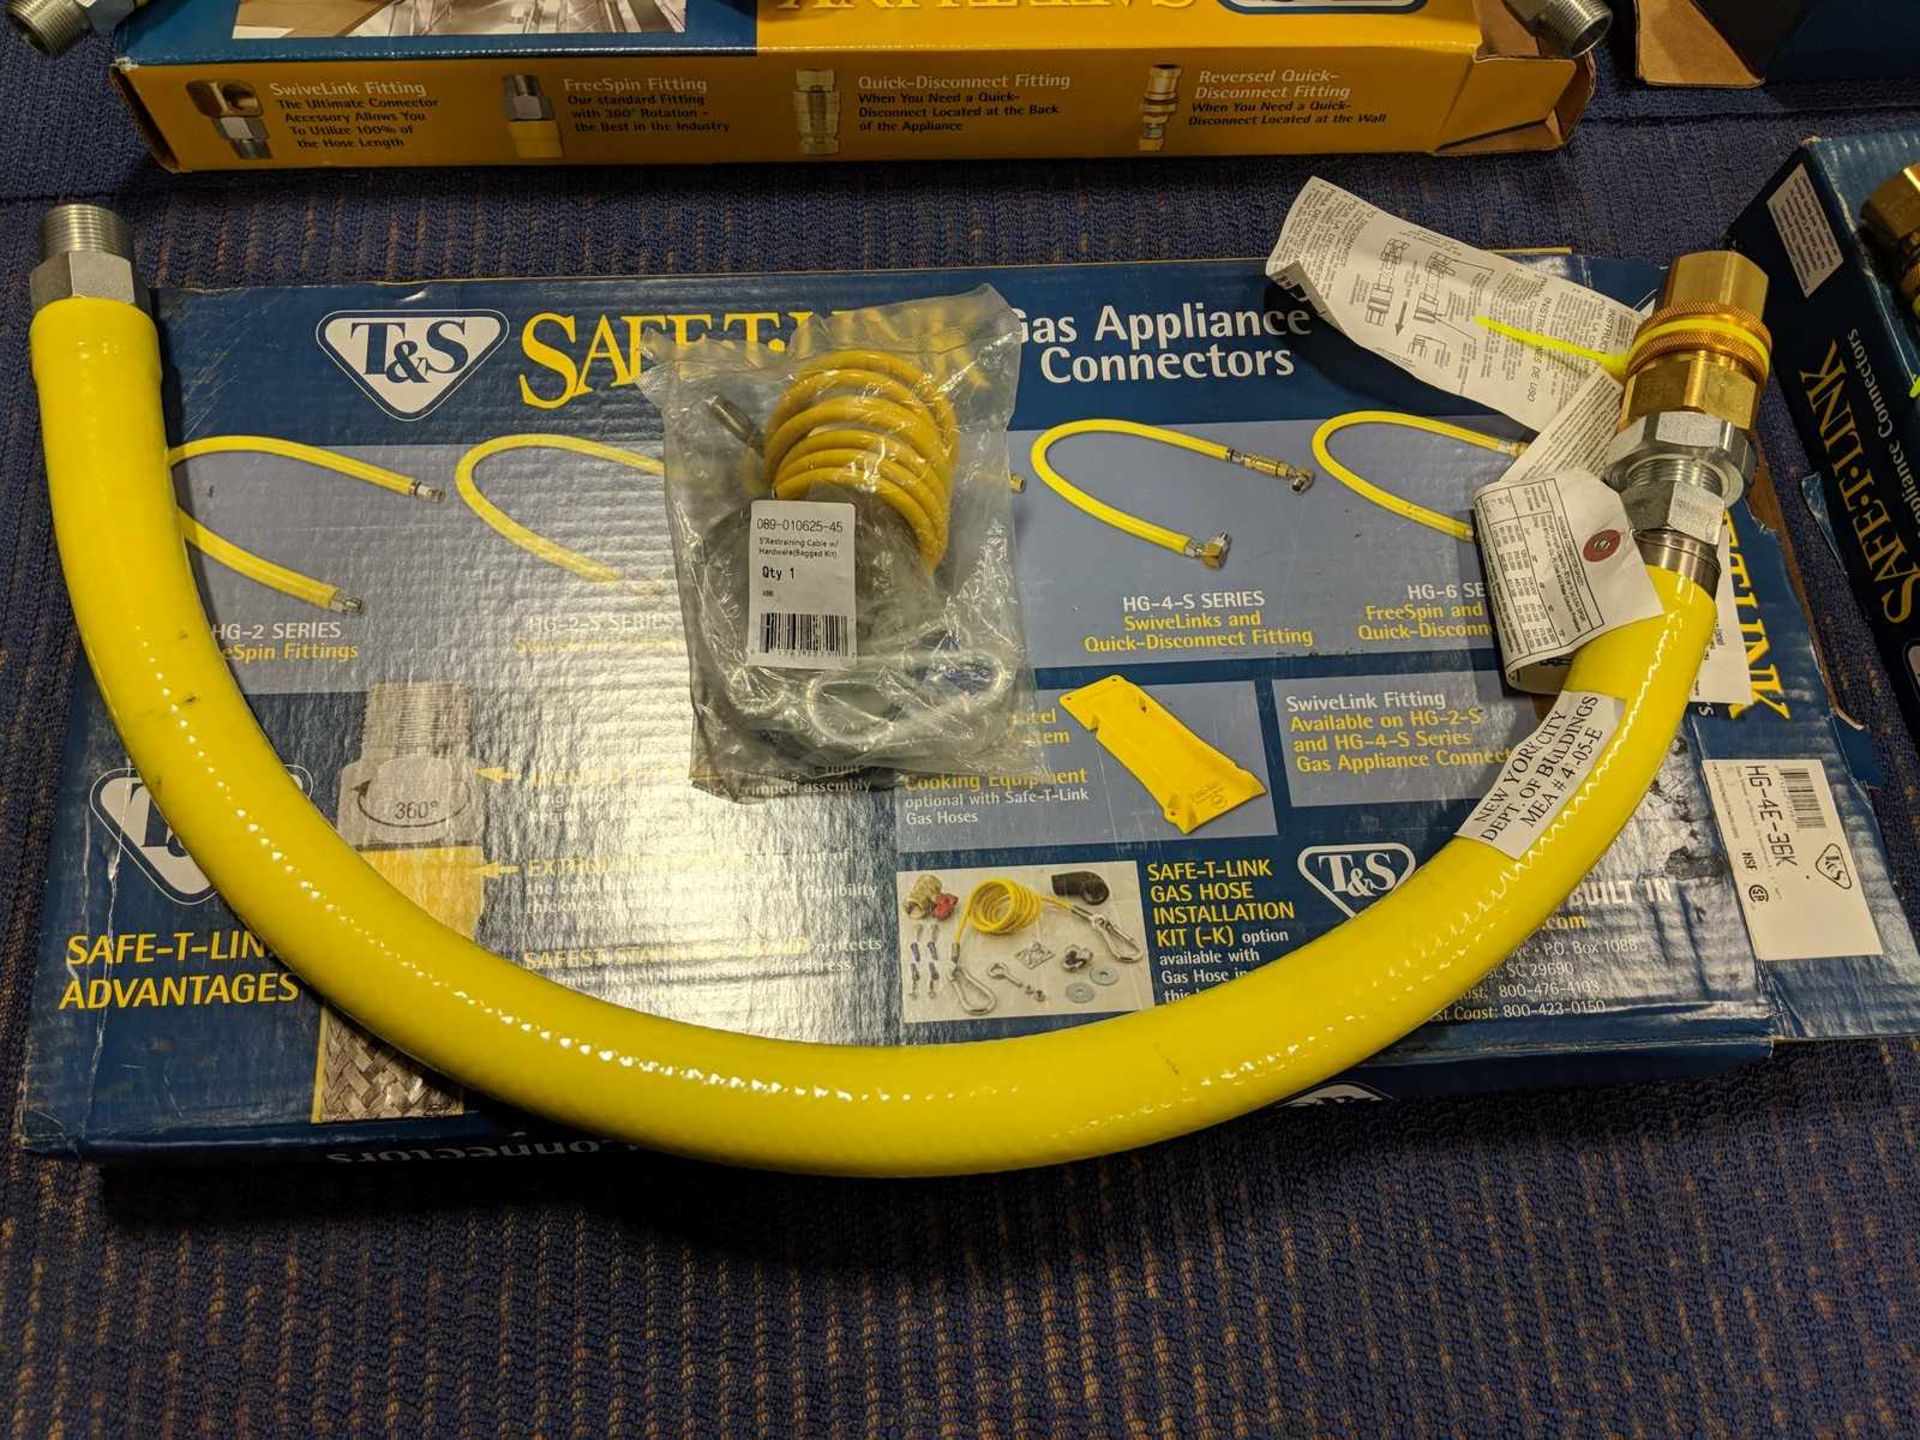 T&S Brass 1" NPT 36" Gas Hose with Quick Disconnect and Install Kit, HG-4E-36K